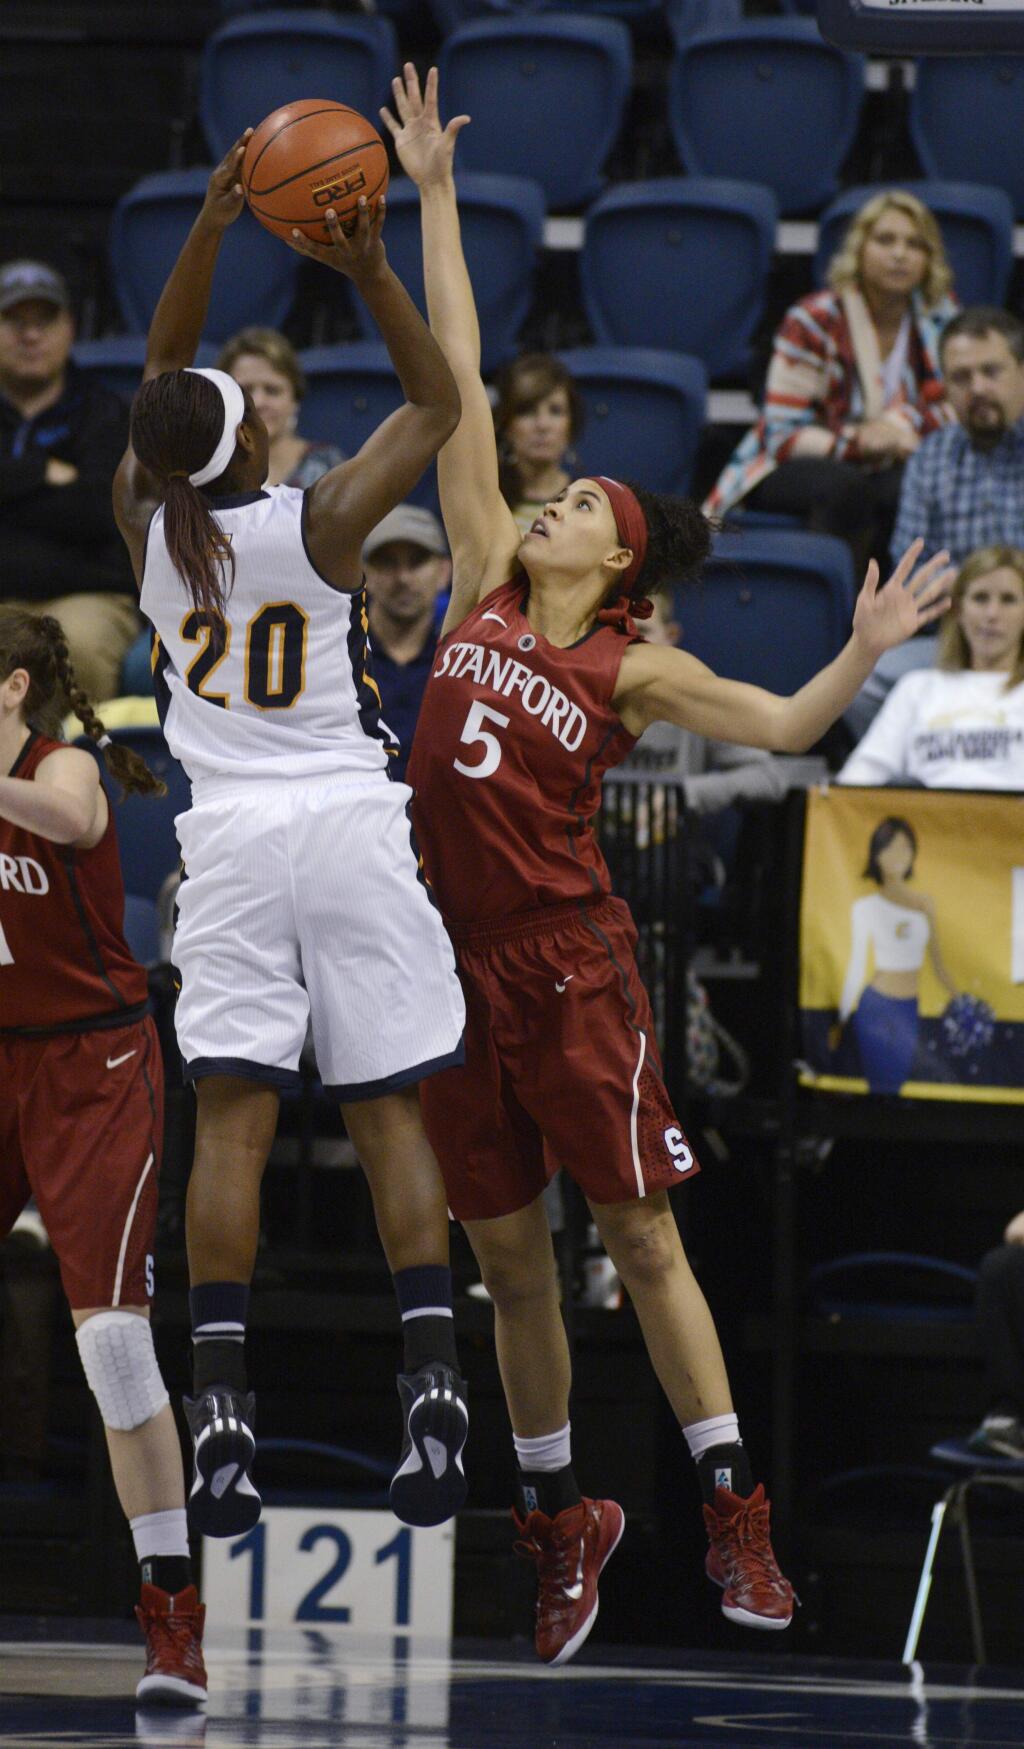 Stanford's Kaylee Johnson (5) blocks a shot by Chattanooga's Keiana Gilbert (20) during the first half of an NCAA college basketball game Wednesday, Dec. 17, 2014, in Chattanooga, Tenn. (AP Photo/Billy Weeks)